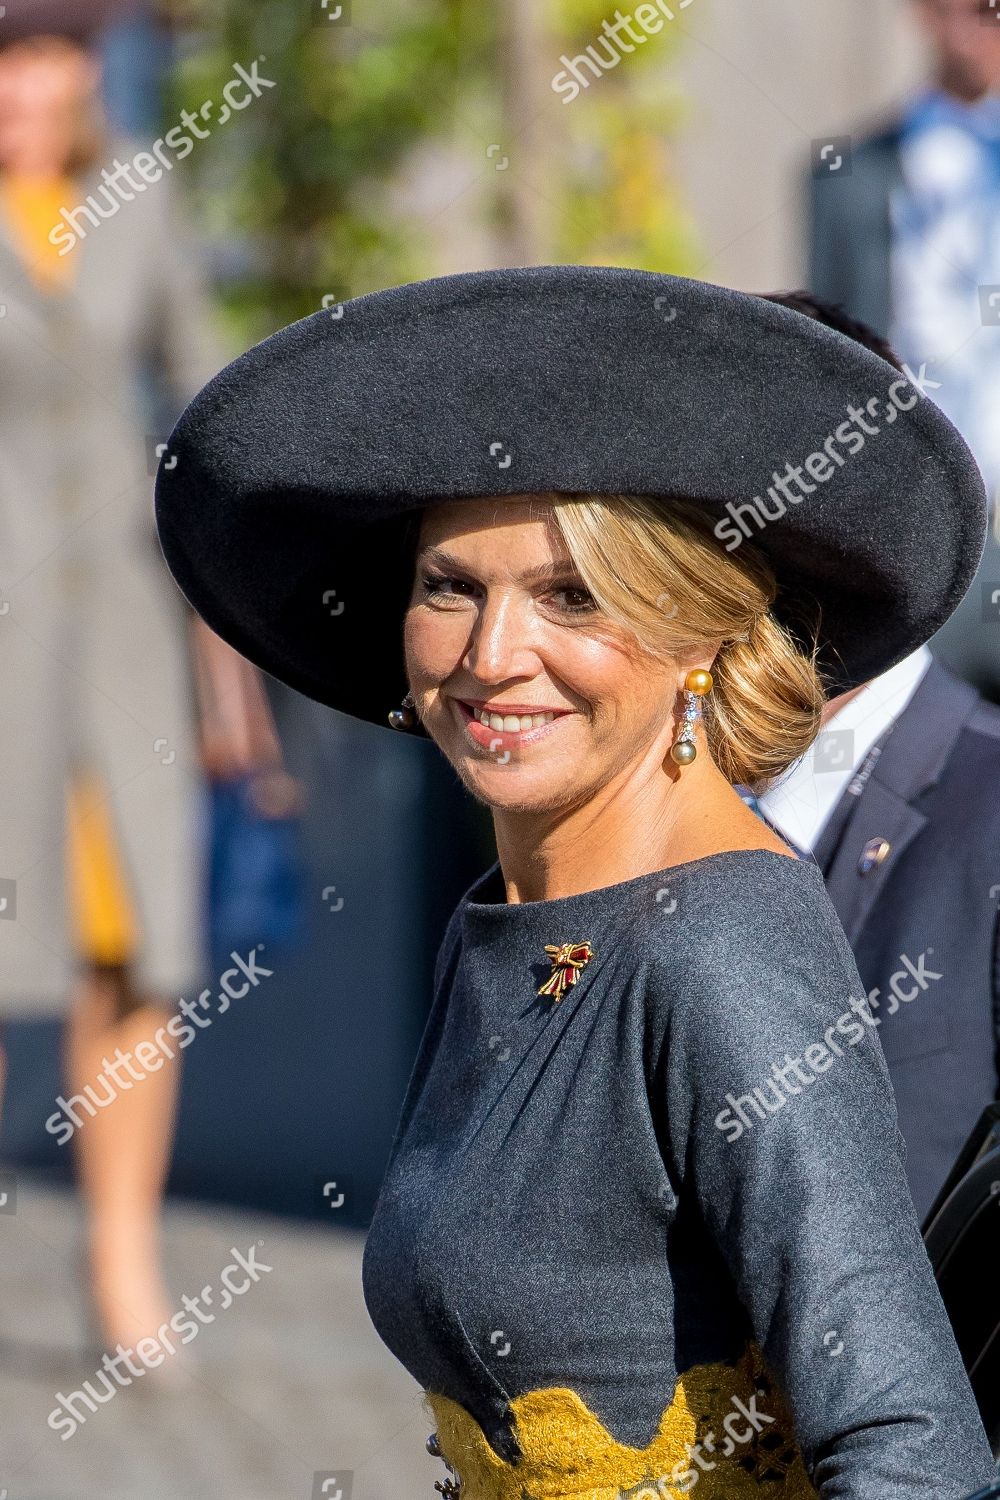 king-willem-alexander-and-queen-maxima-visit-to-germany-shutterstock-editorial-9921325z.jpg